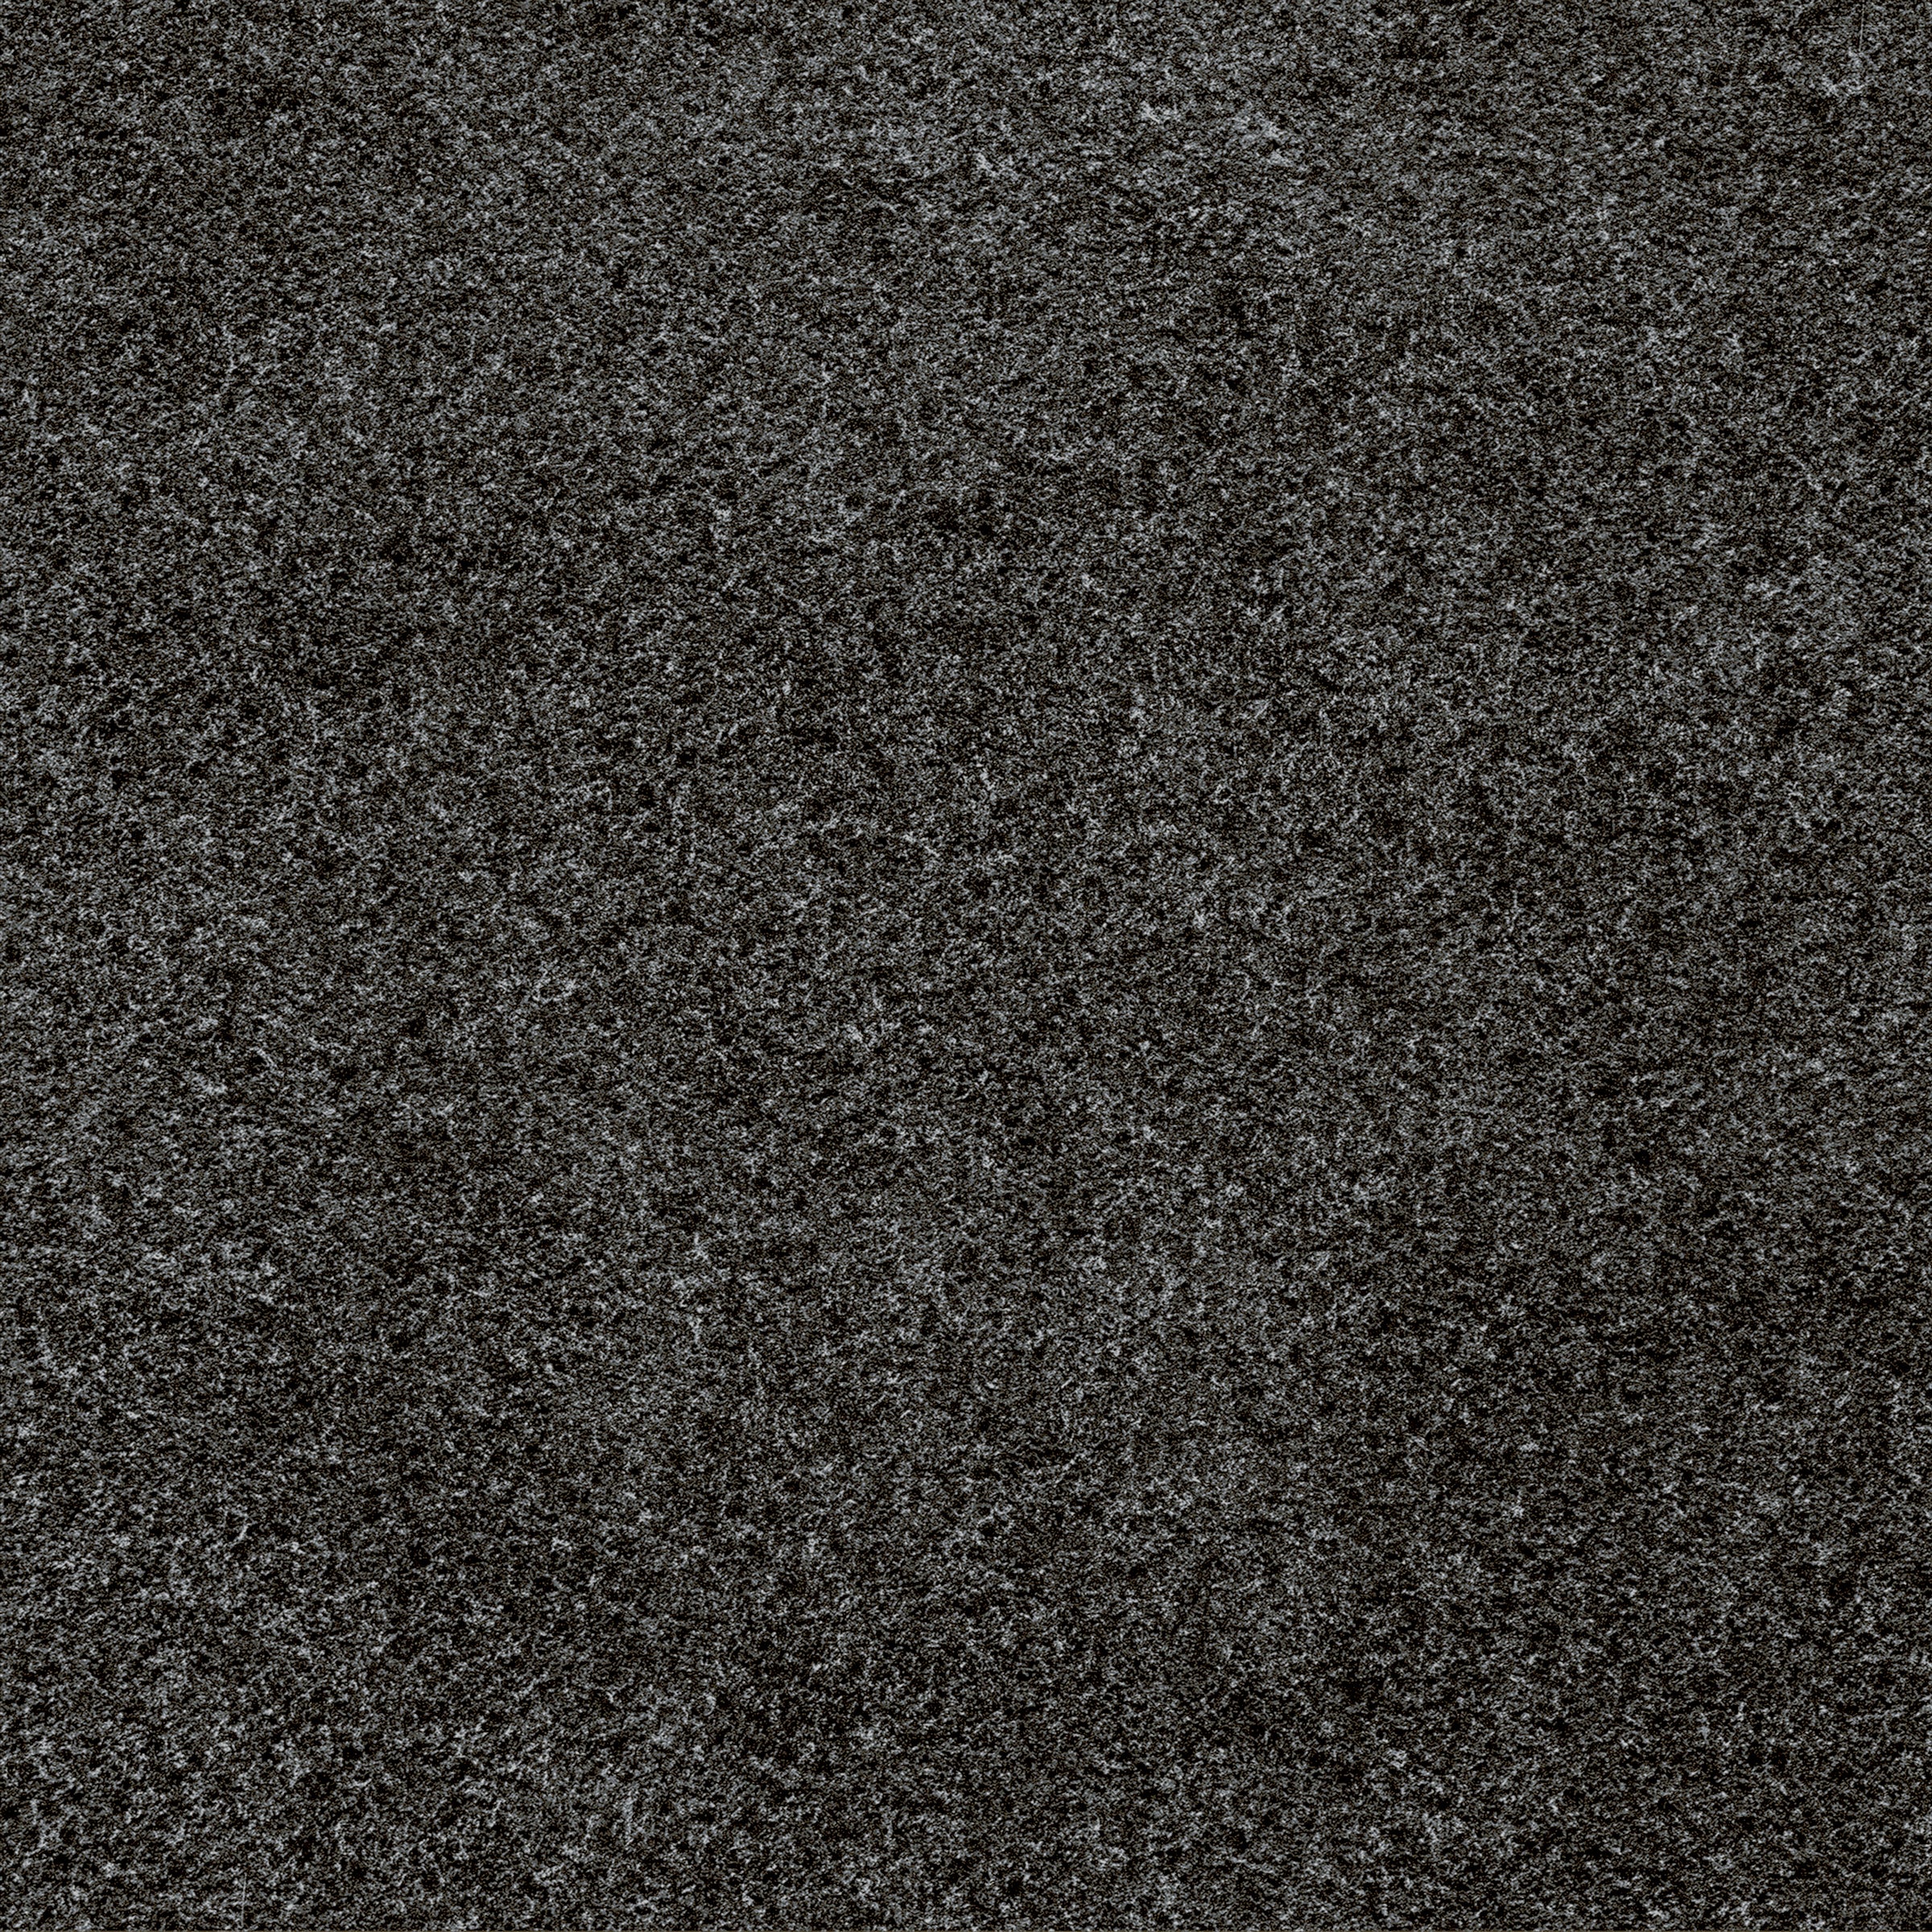 Emser XTRA BASALT BLACK is an Emser tile product and it is made of porcelain. Emser XTRA BASALT BLACK is available in 24x24 and in 12x24 pool coping. 